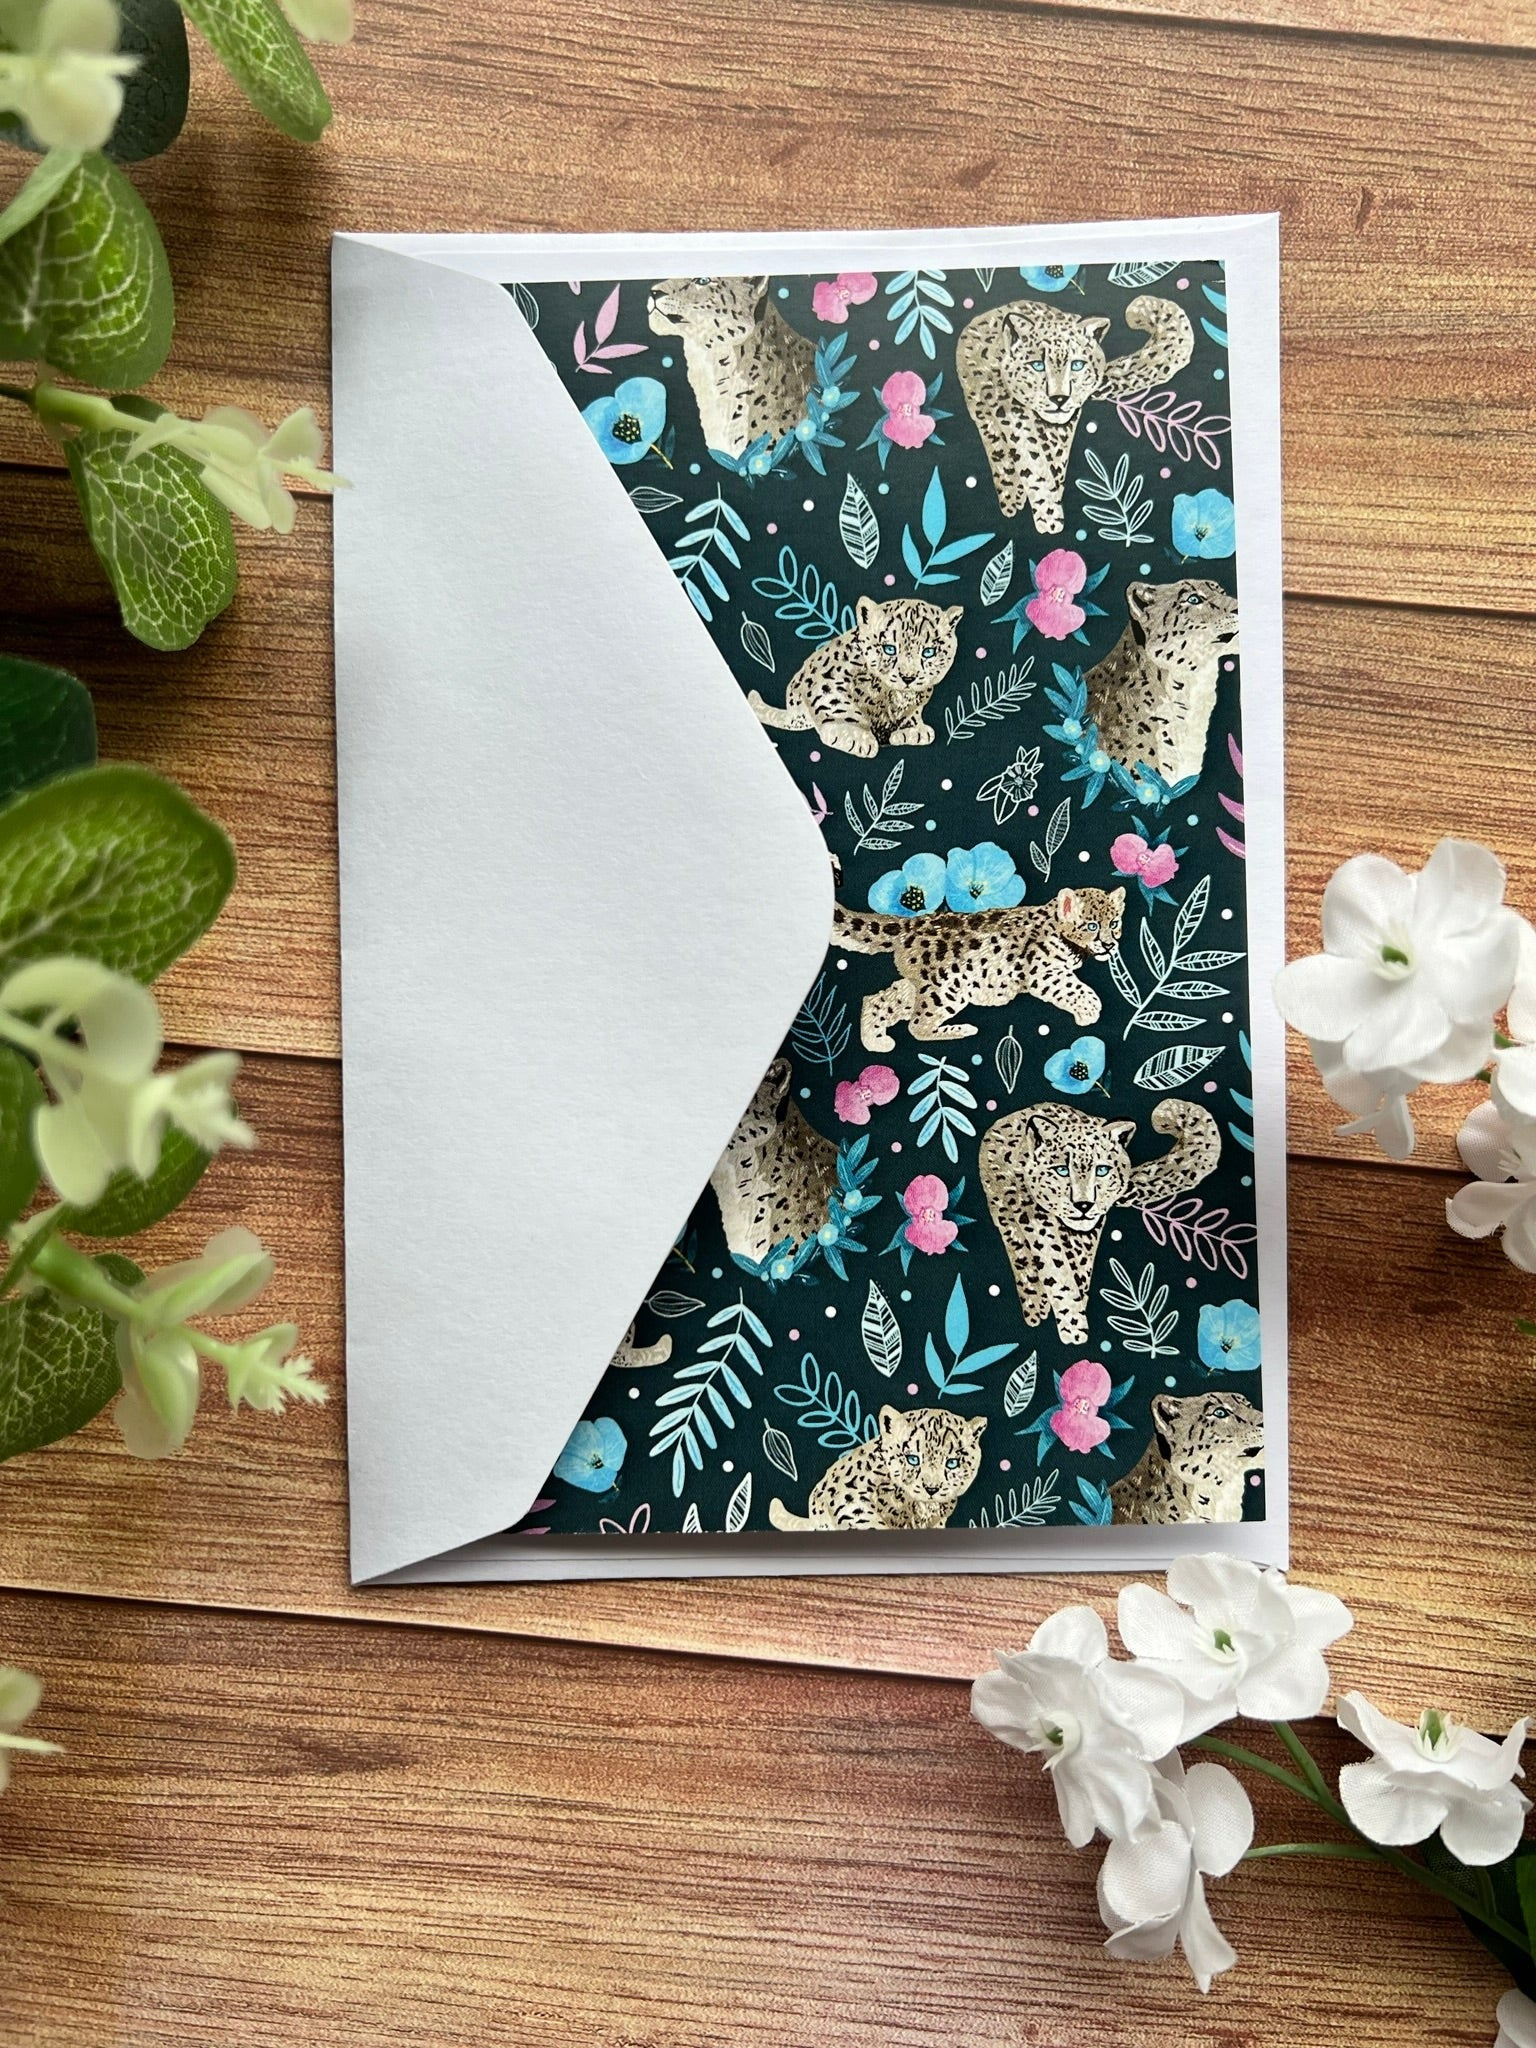 snow leopard birthday card, perfect card for a wild animal lover